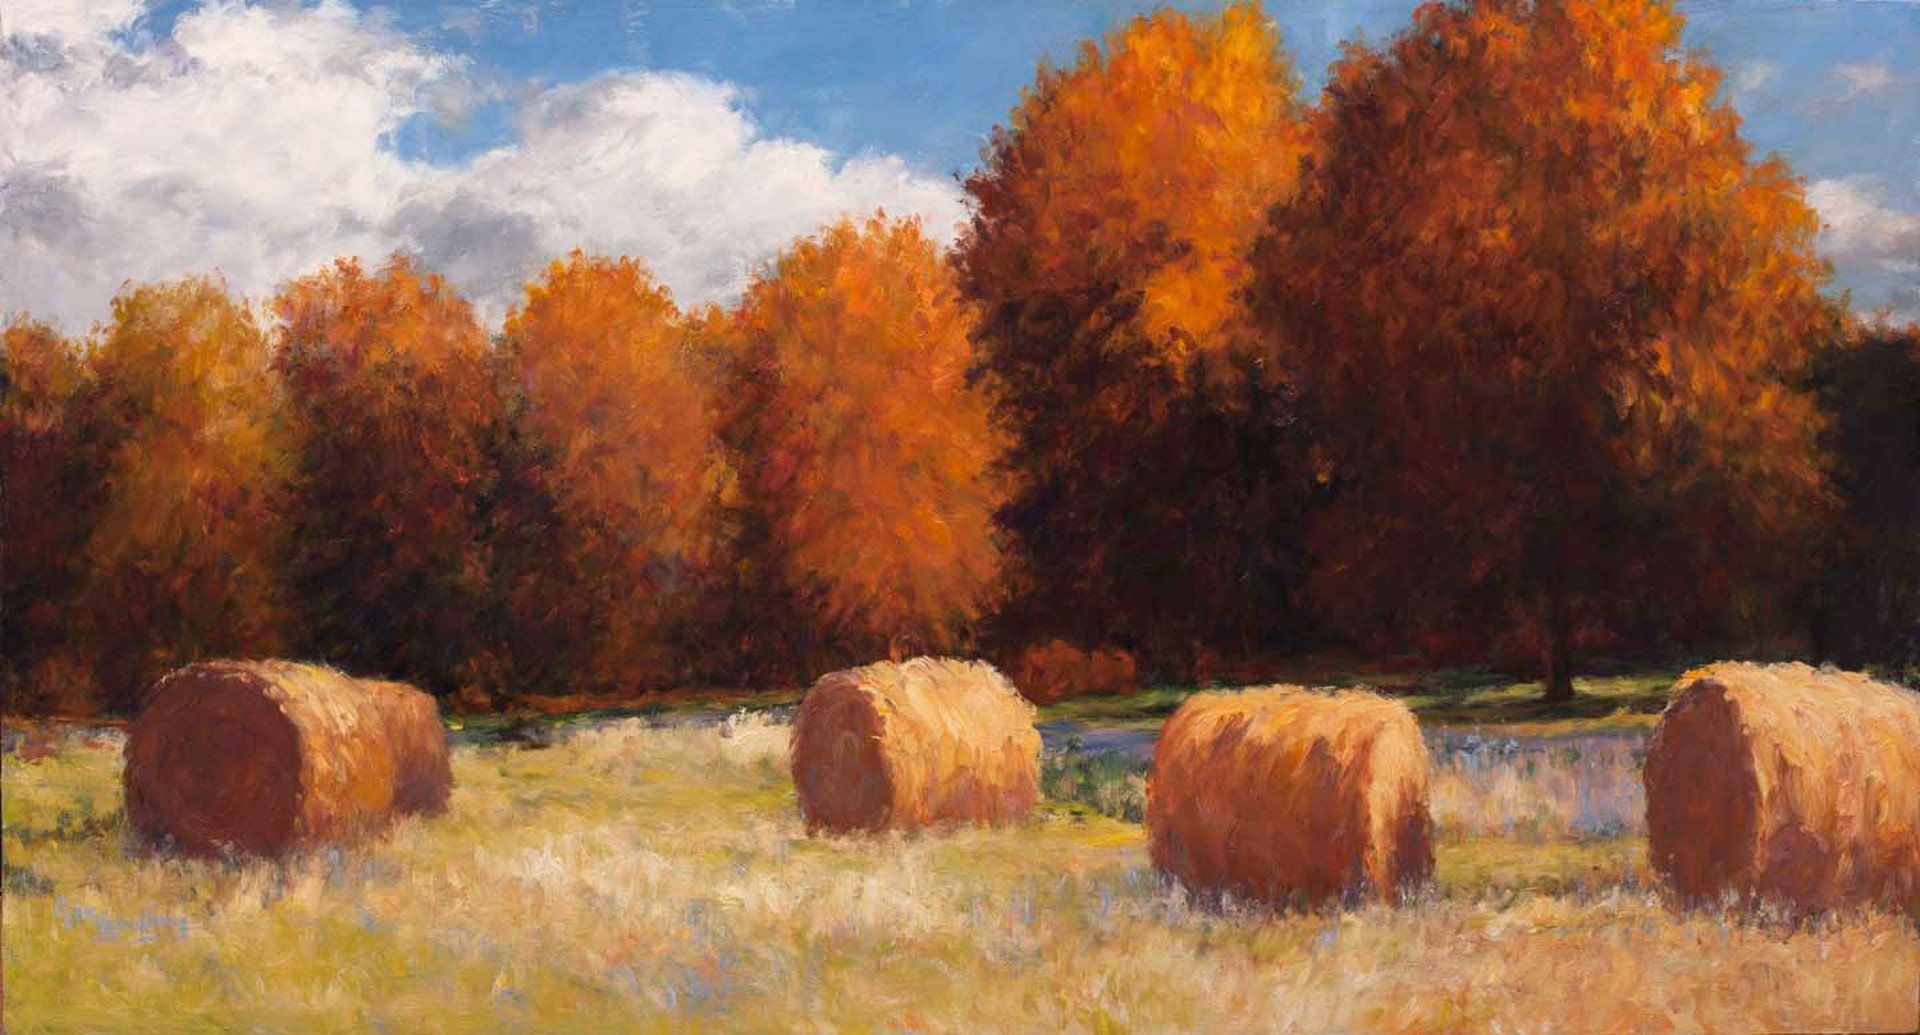 Scatter of Bales by Gary Bowling